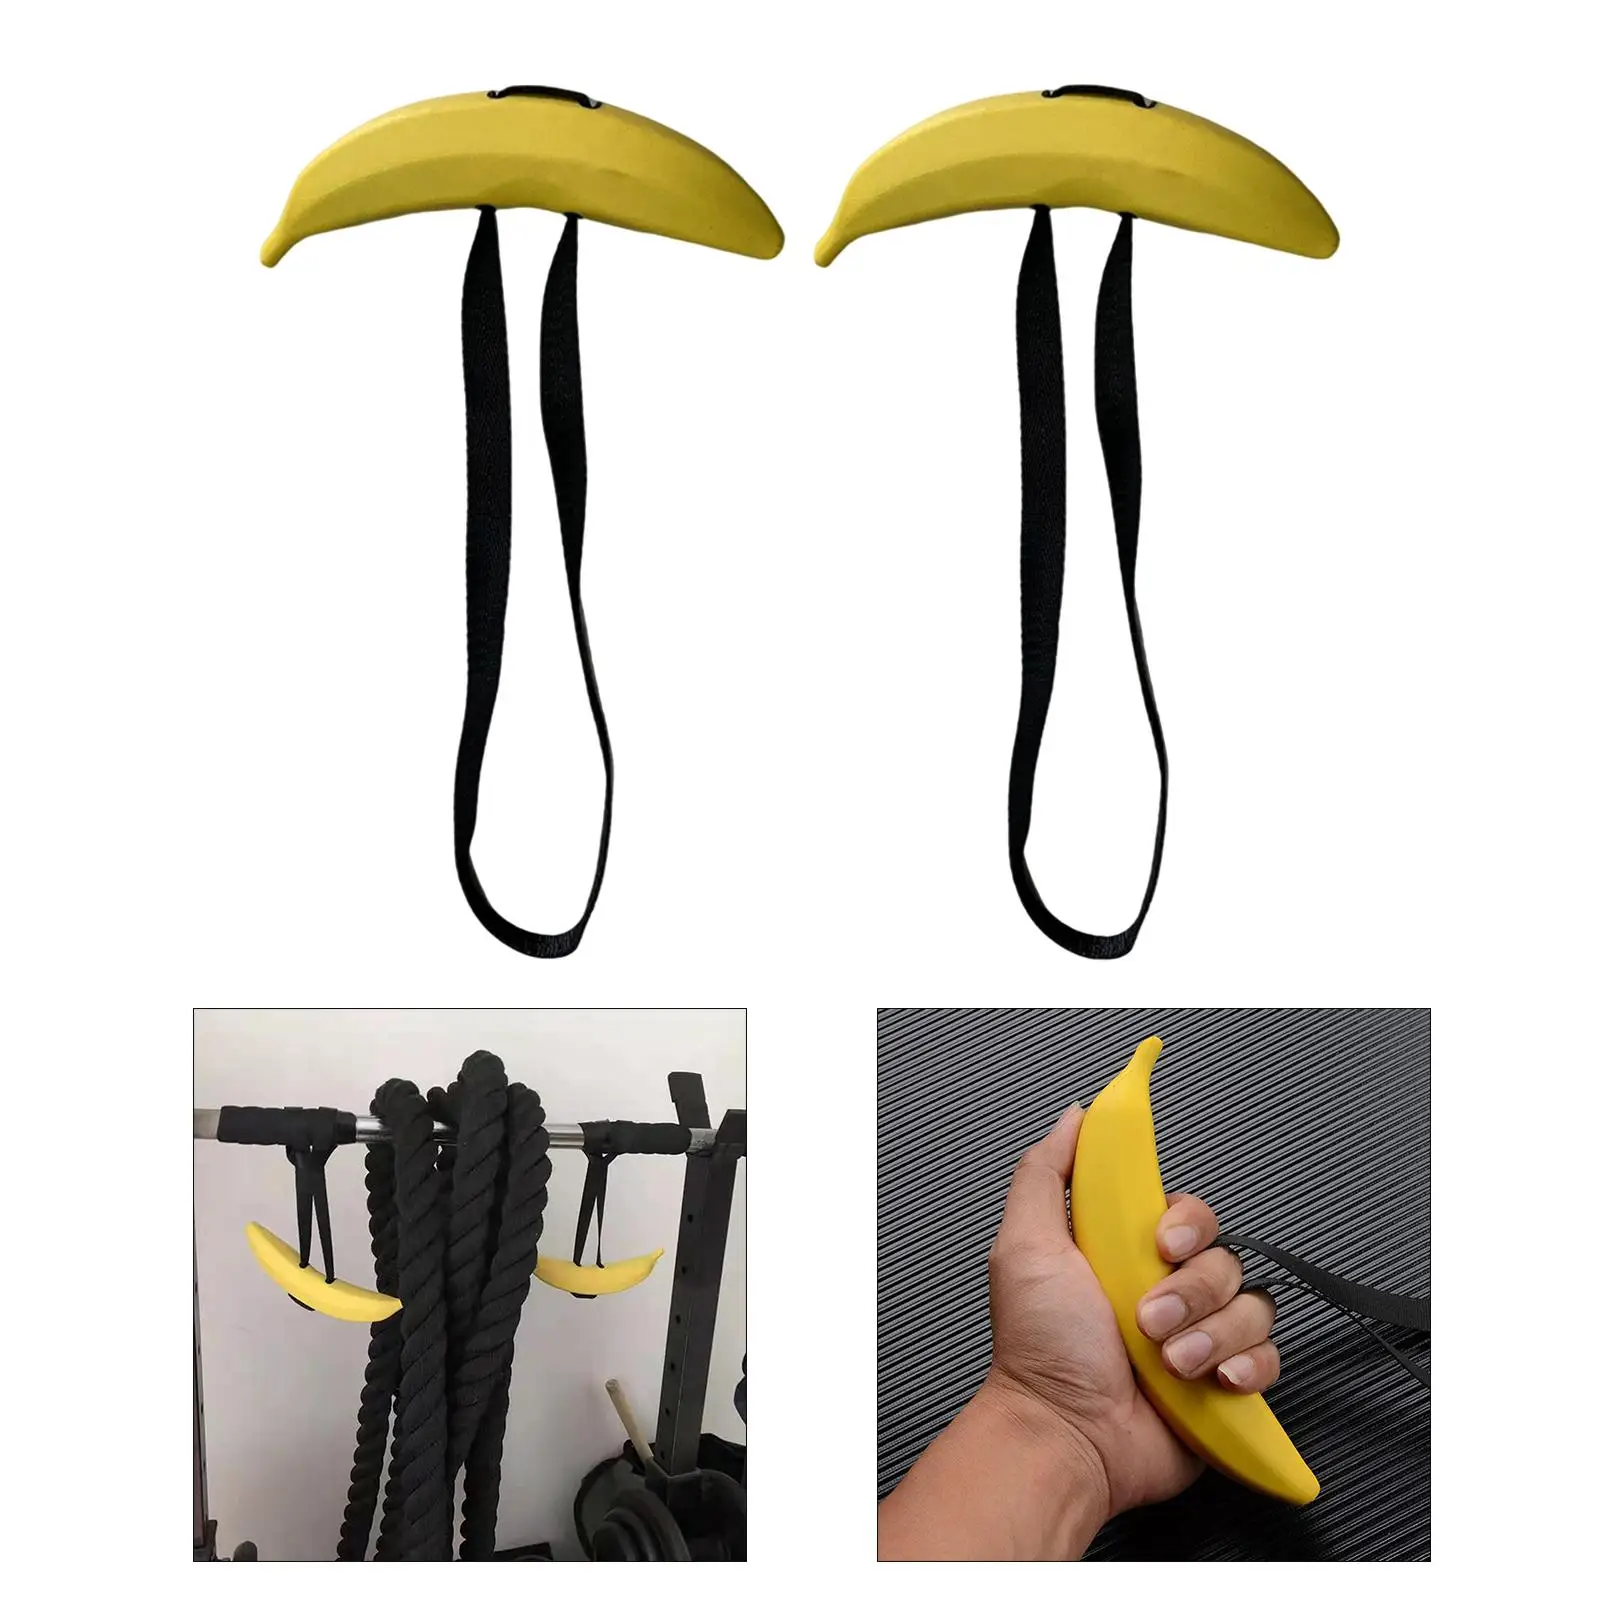 Pull up Handles Training Grips Resistance Band Handles Weightlifting Grips for Fitness Gym Workout Row Attachment Deadlift